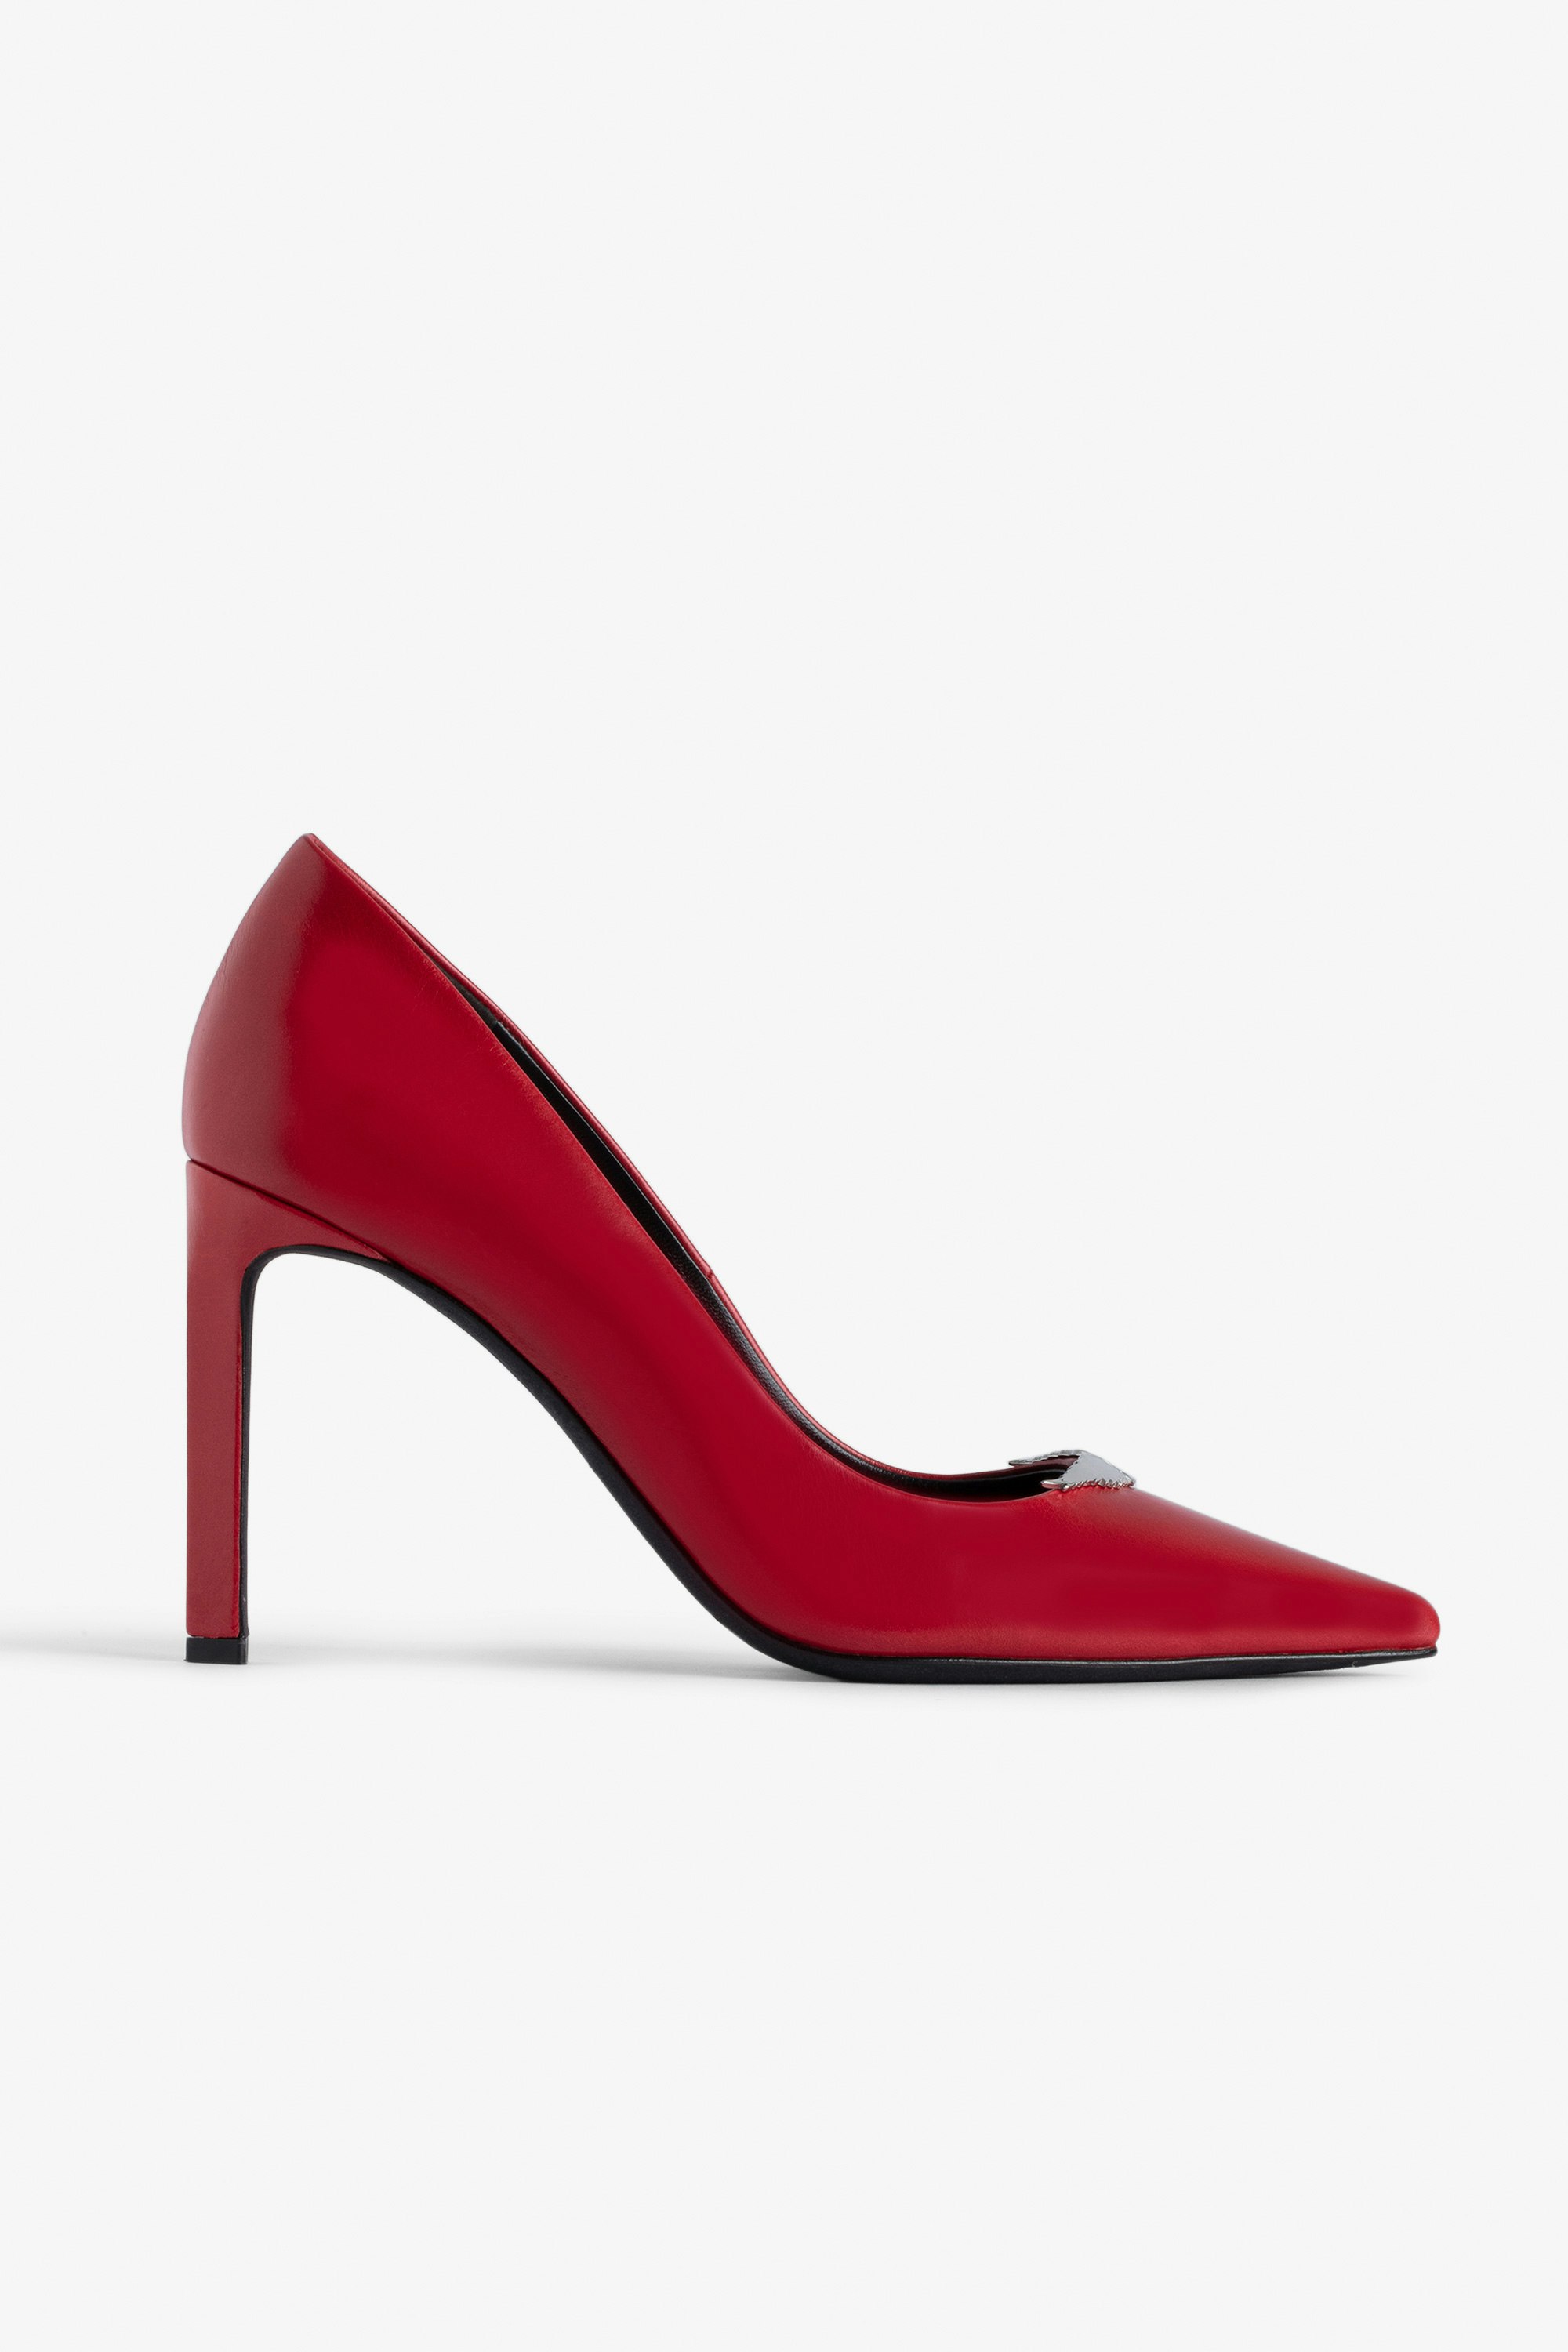 Perfect Court Shoes - Women’s red vintage-effect leather court shoes with wings charm.